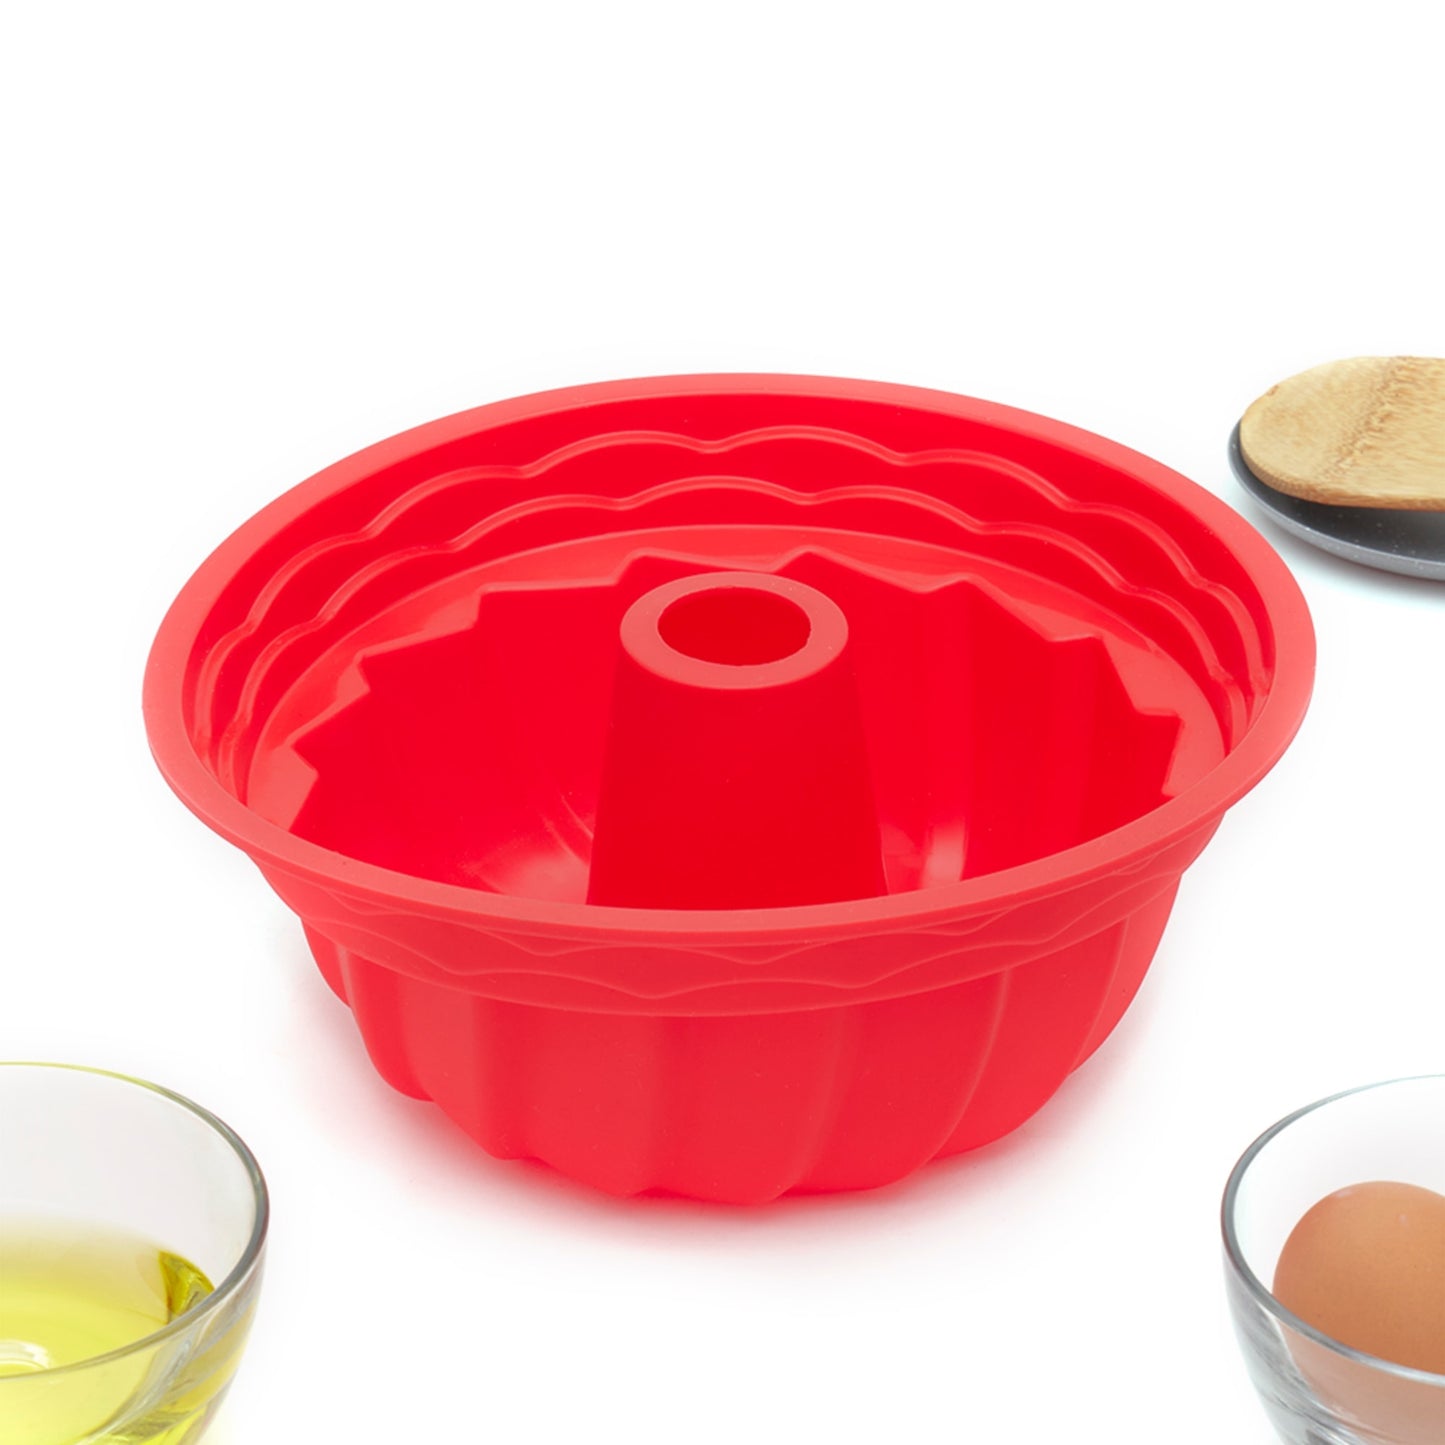 Fluted Silicone Baking Pan